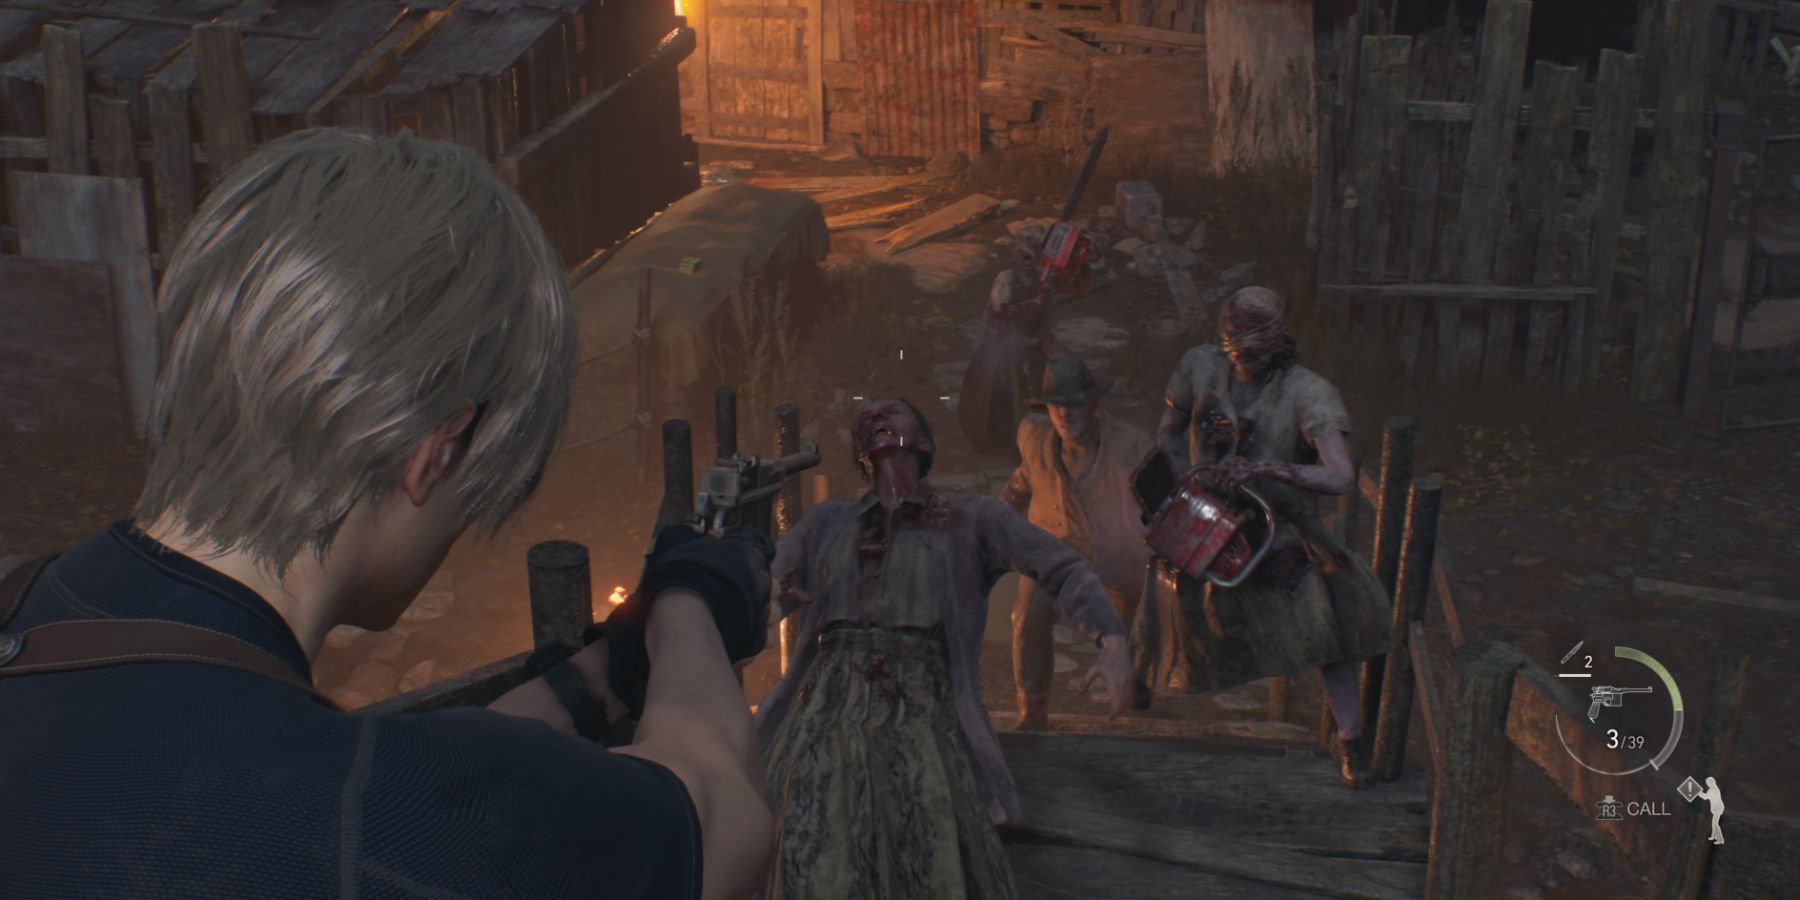 Leon aims at a swarm of enemies in Resident Evil 4 remake